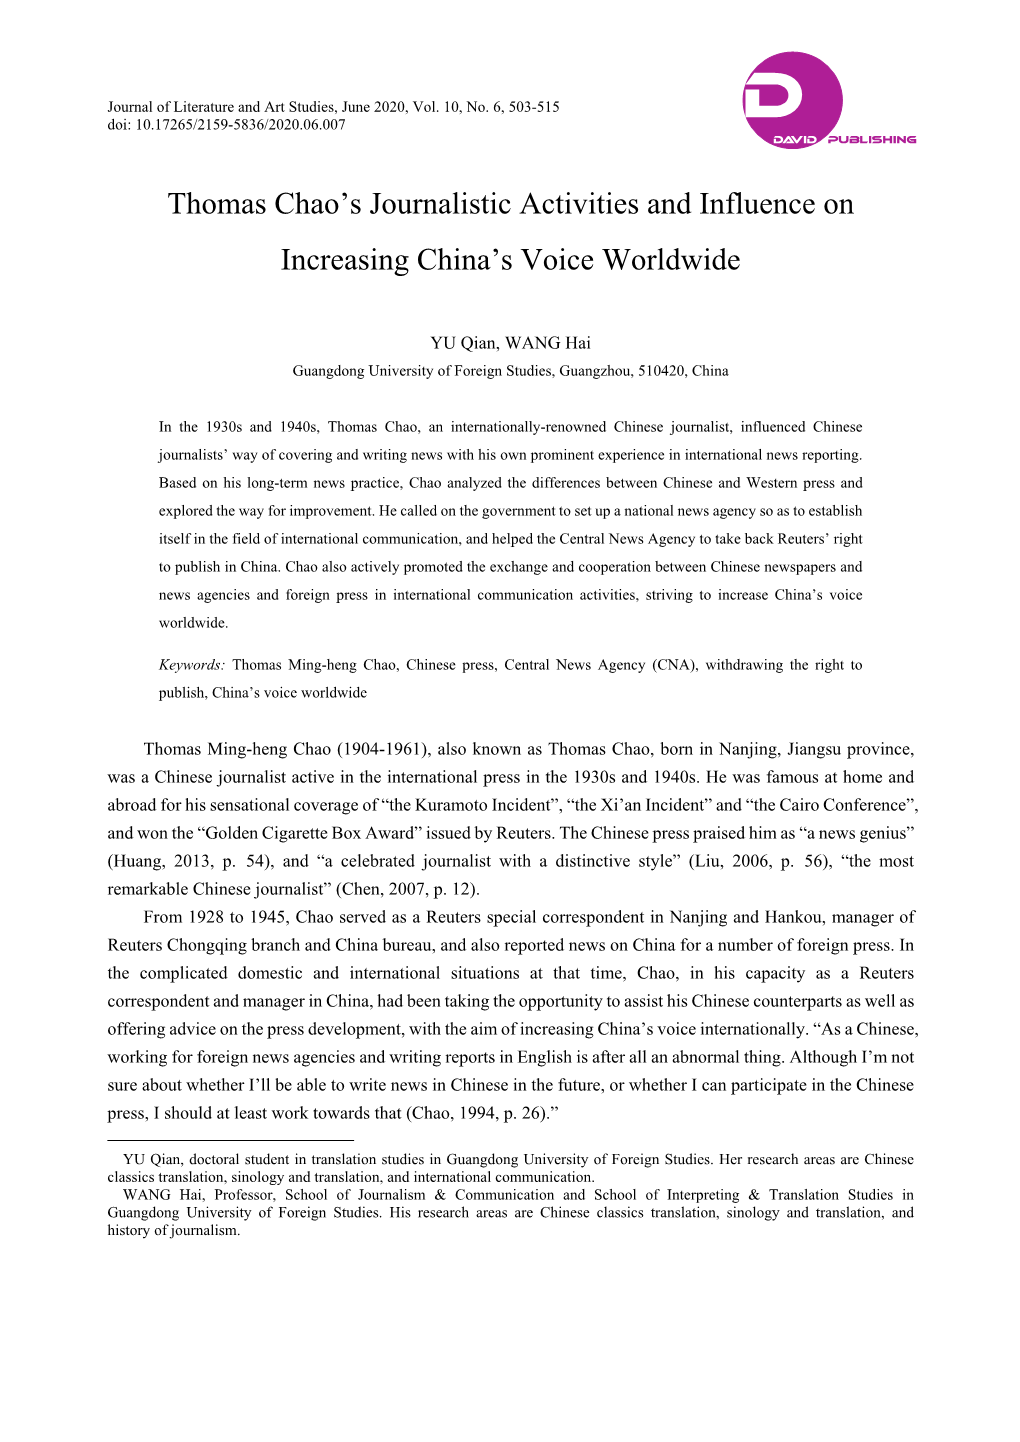 Thomas Chao's Journalistic Activities and Influence on Increasing China's